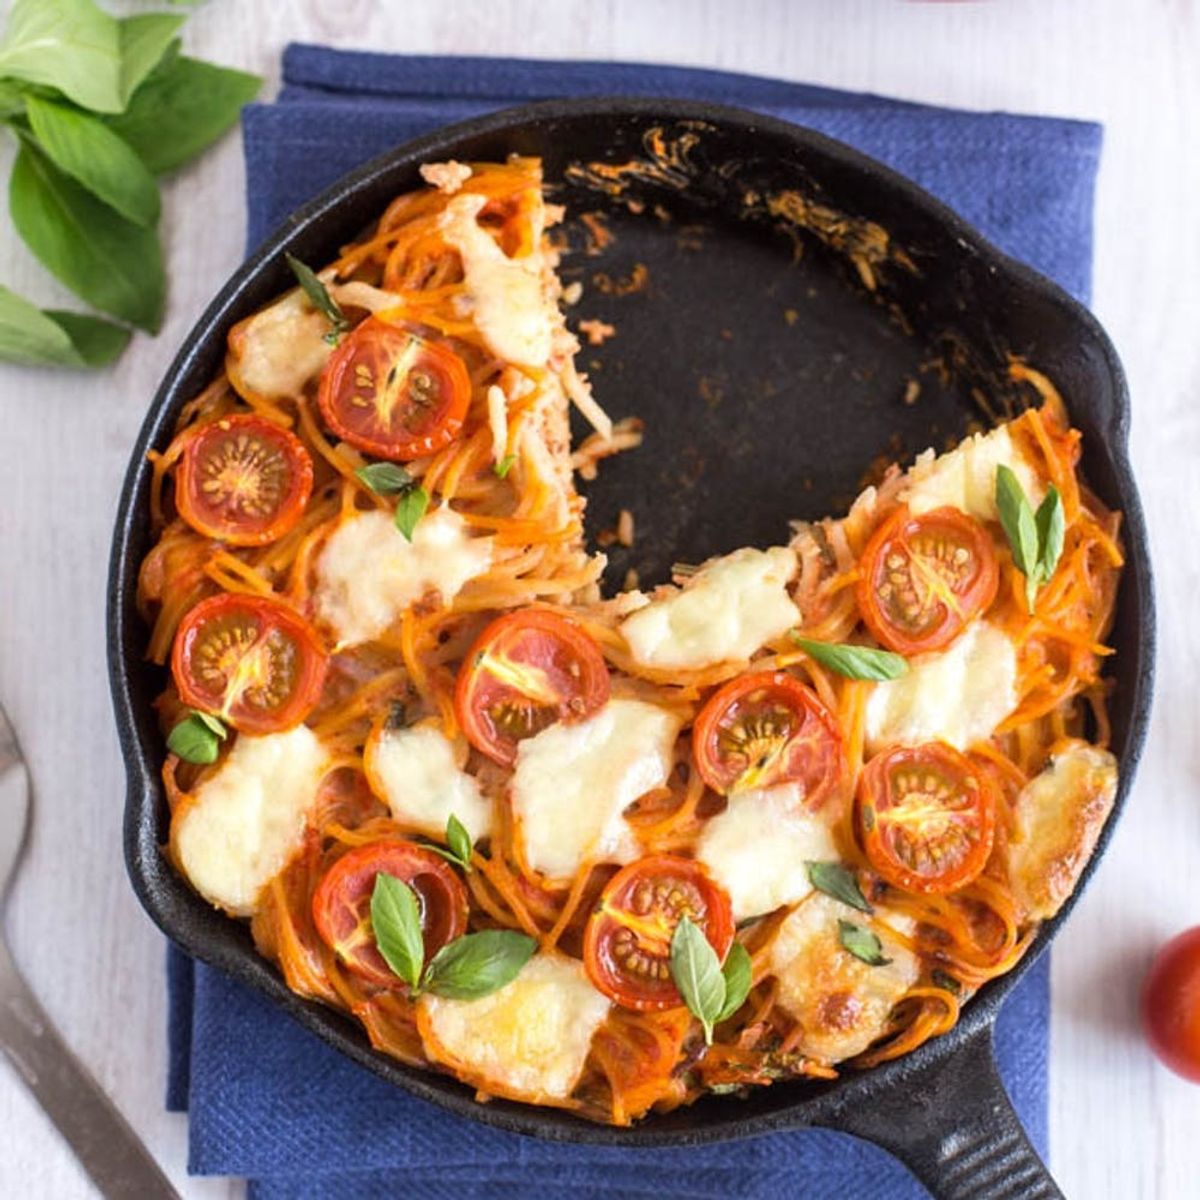 Liven Up Your Leftovers With This Spaghetti Frittata